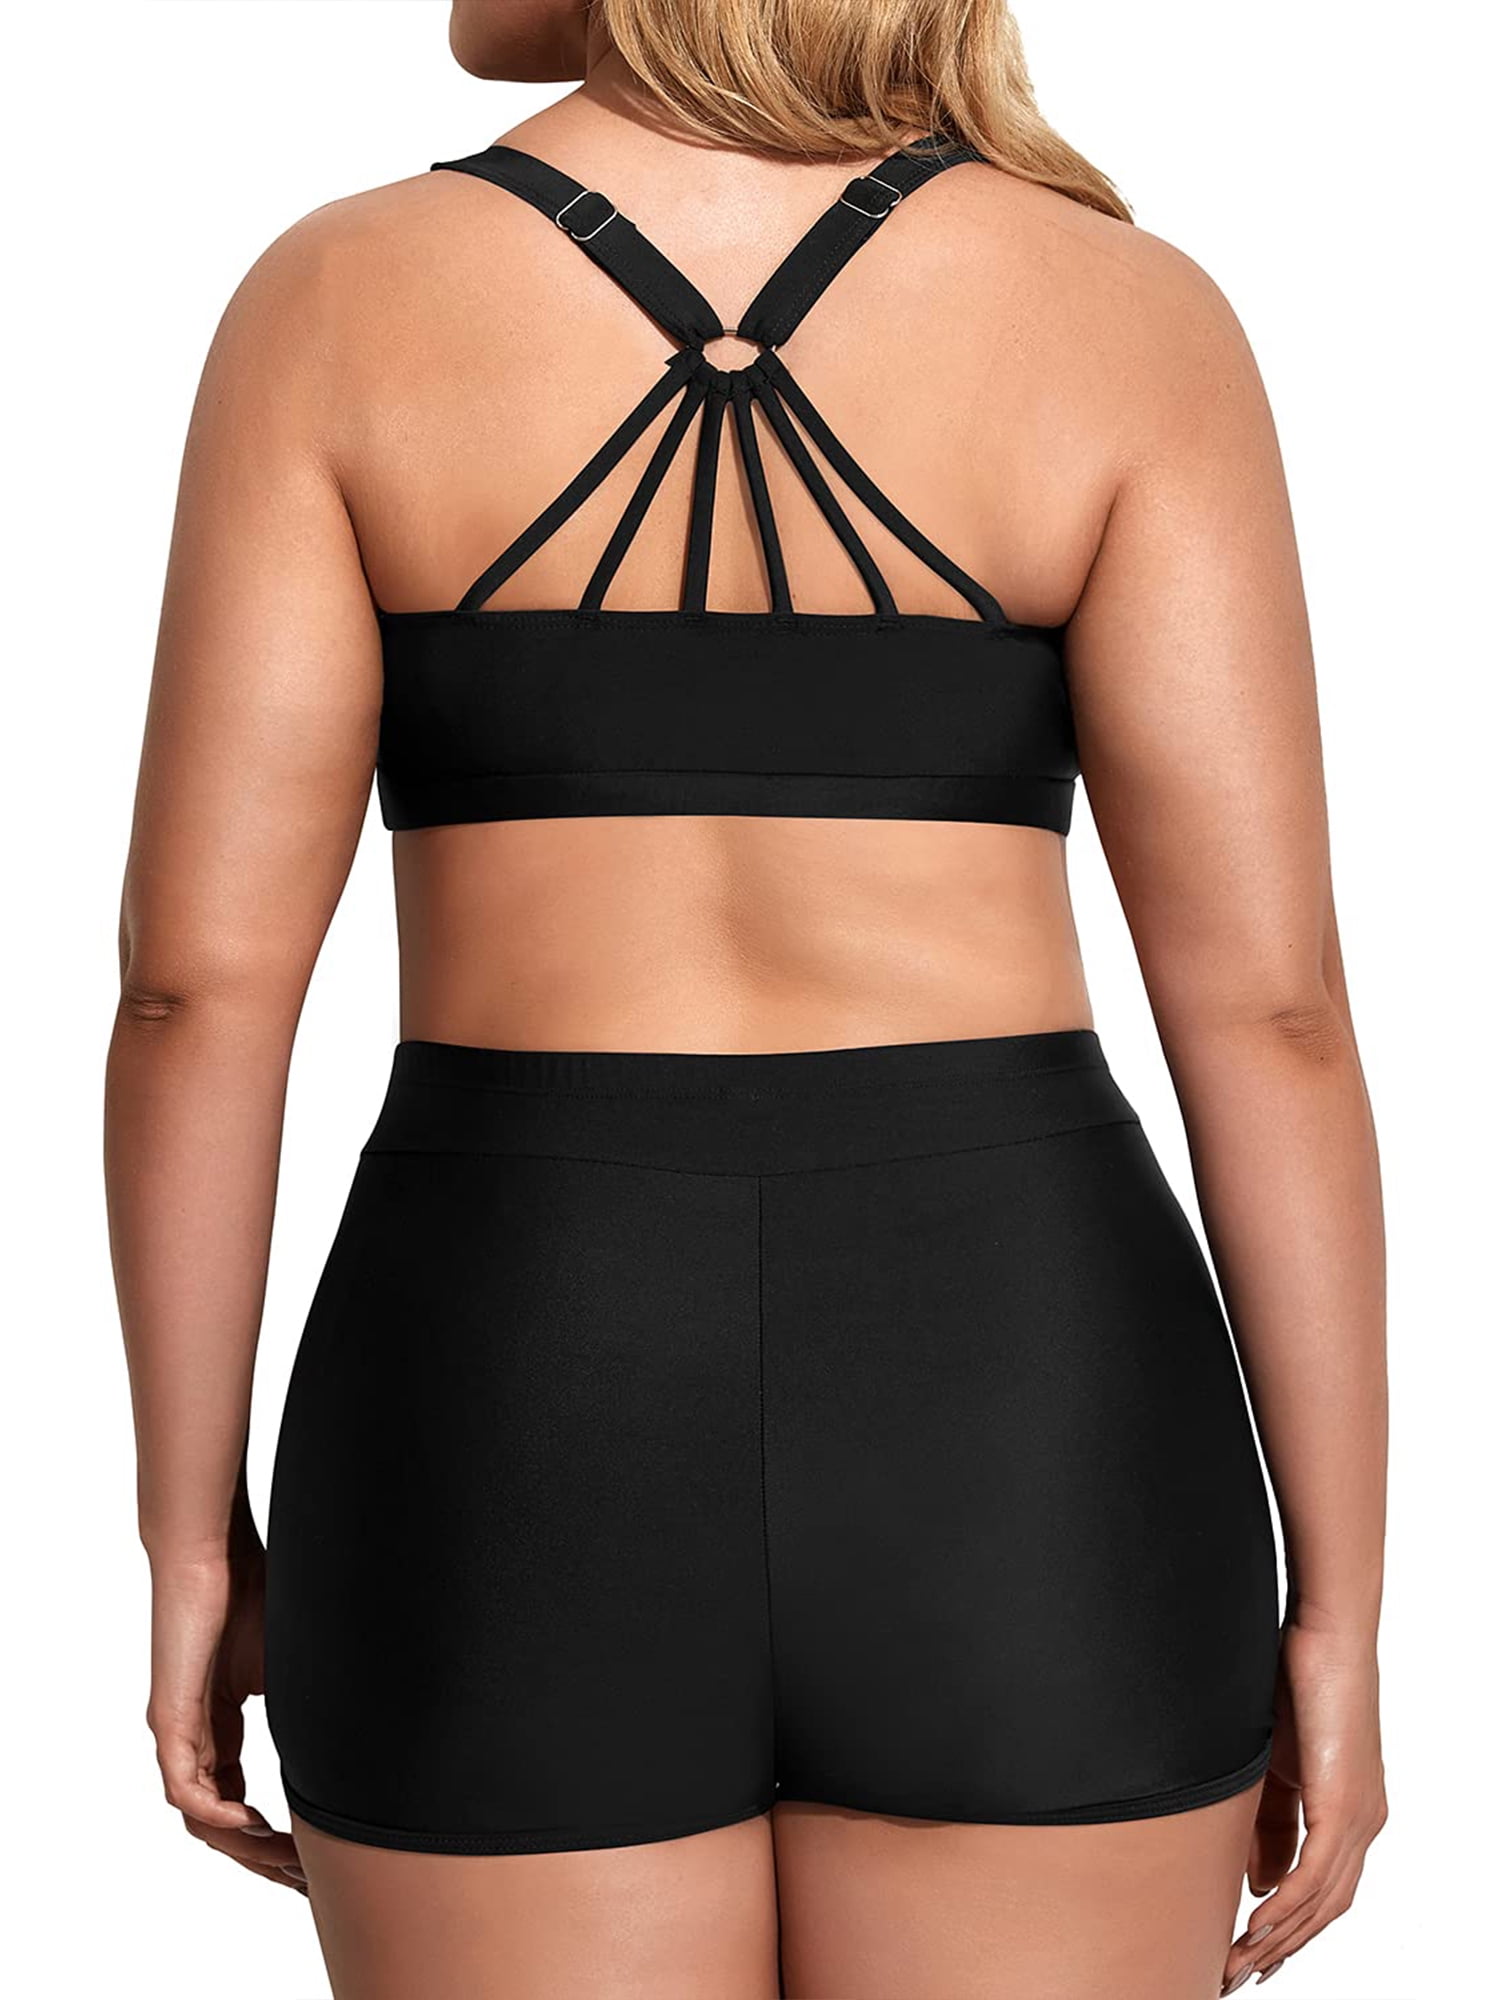 Plus Size Black Print Tankini Tiktok Swimsuit Set With Shorts And V Neck  2XL From Cong00, $10.66